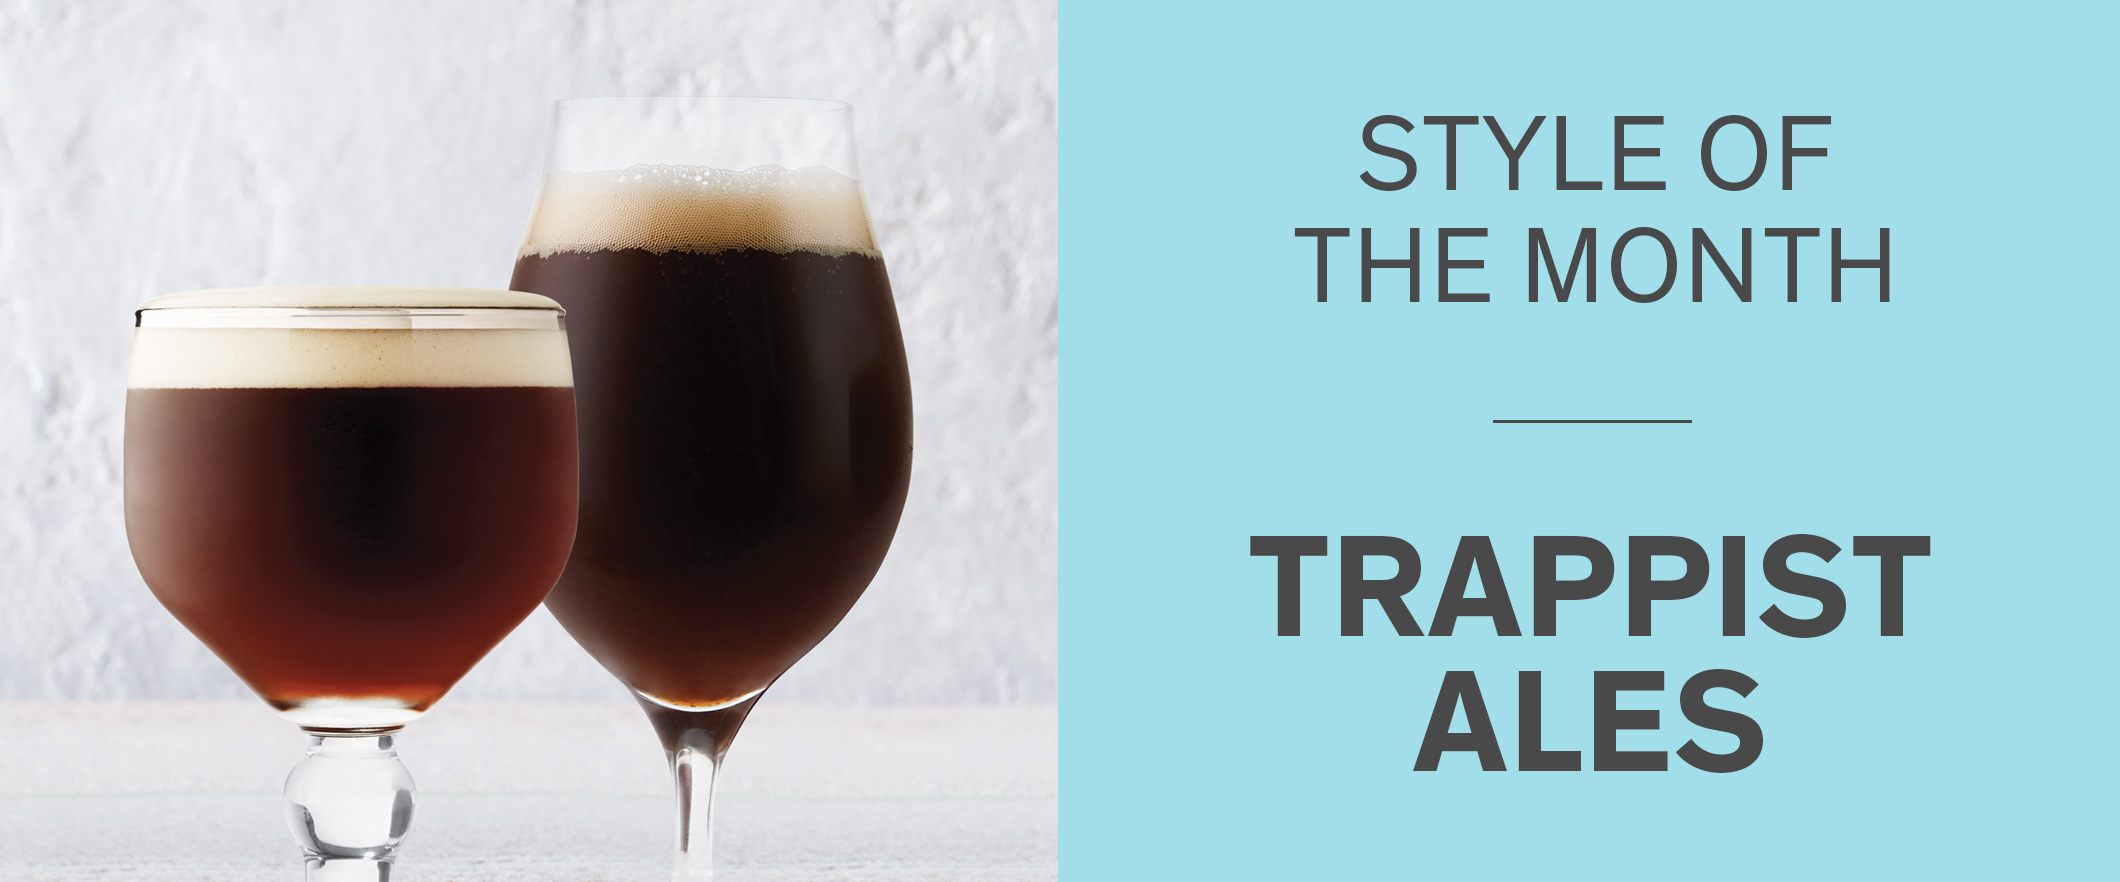 STYLE OF THE MONTH: Trappist Ales